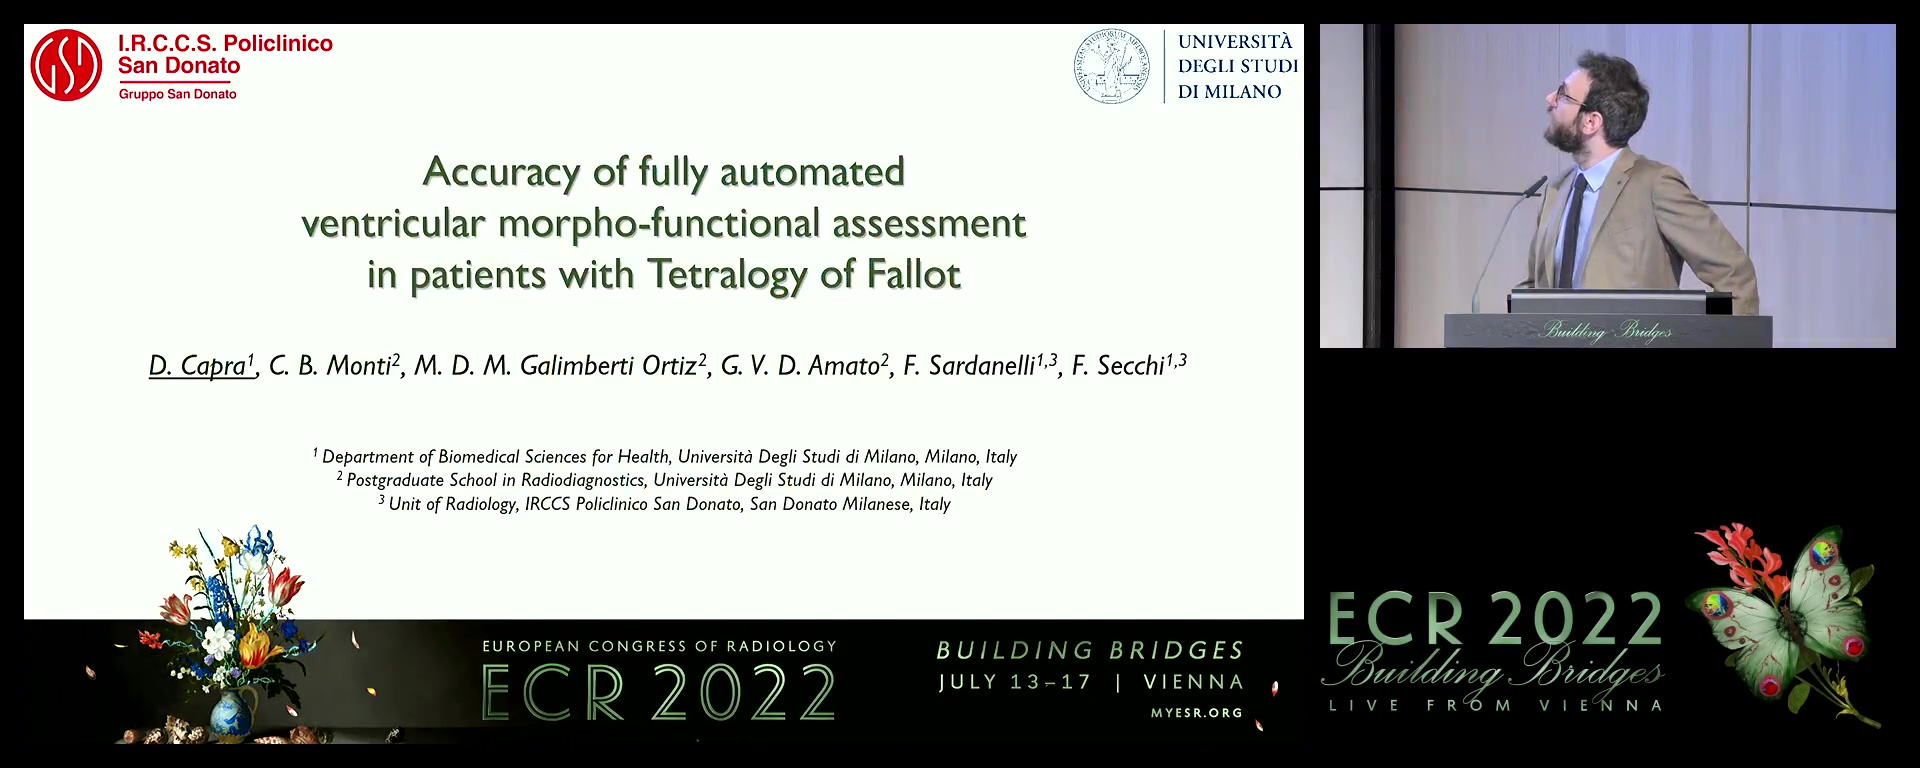 Accuracy of fully automated ventricular morpho-functional assessment in patients with tetralogy of fallot - Davide Capra, Milano / IT